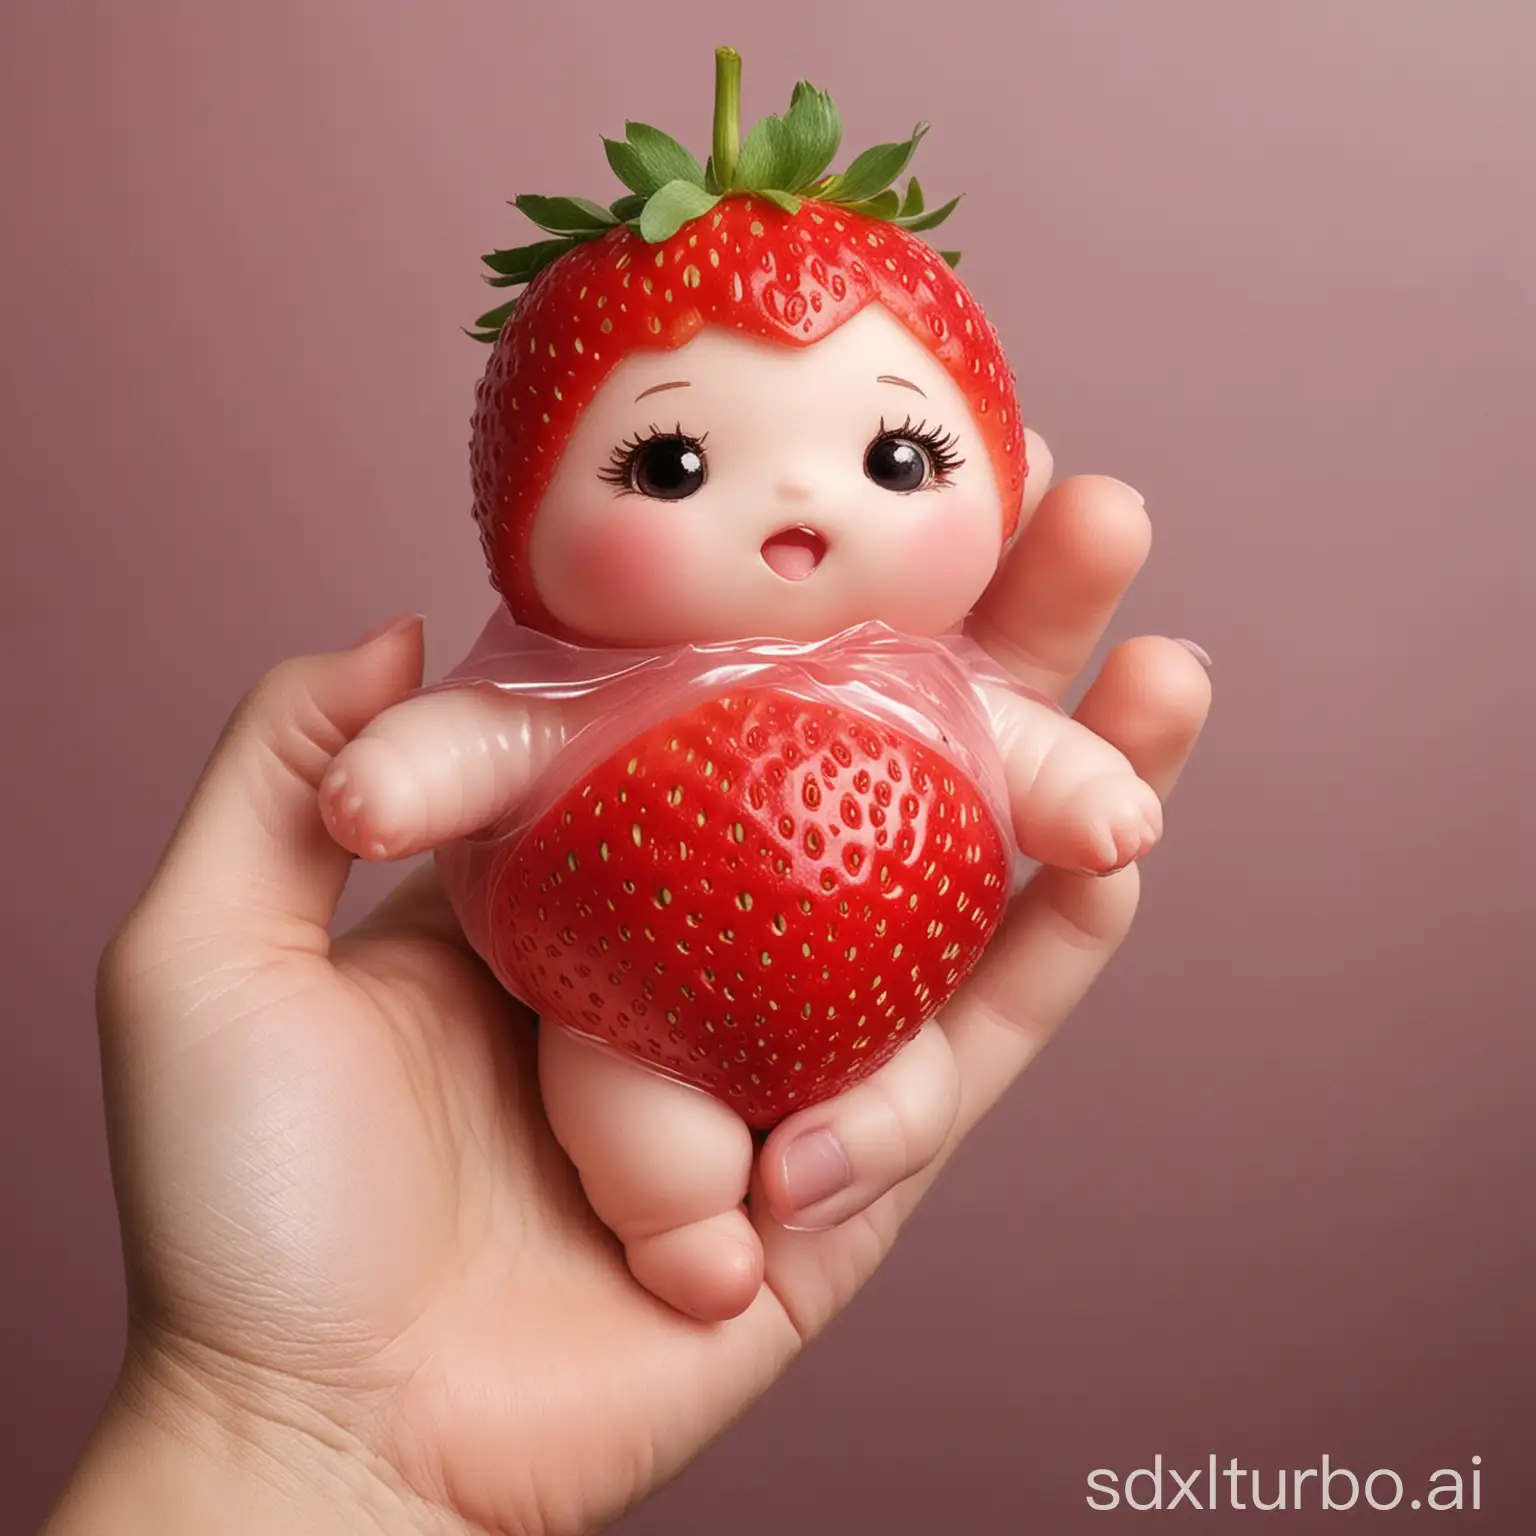 Adorable-Strawberry-Costume-Sweet-Girl-Dressed-as-a-Juicy-Berry